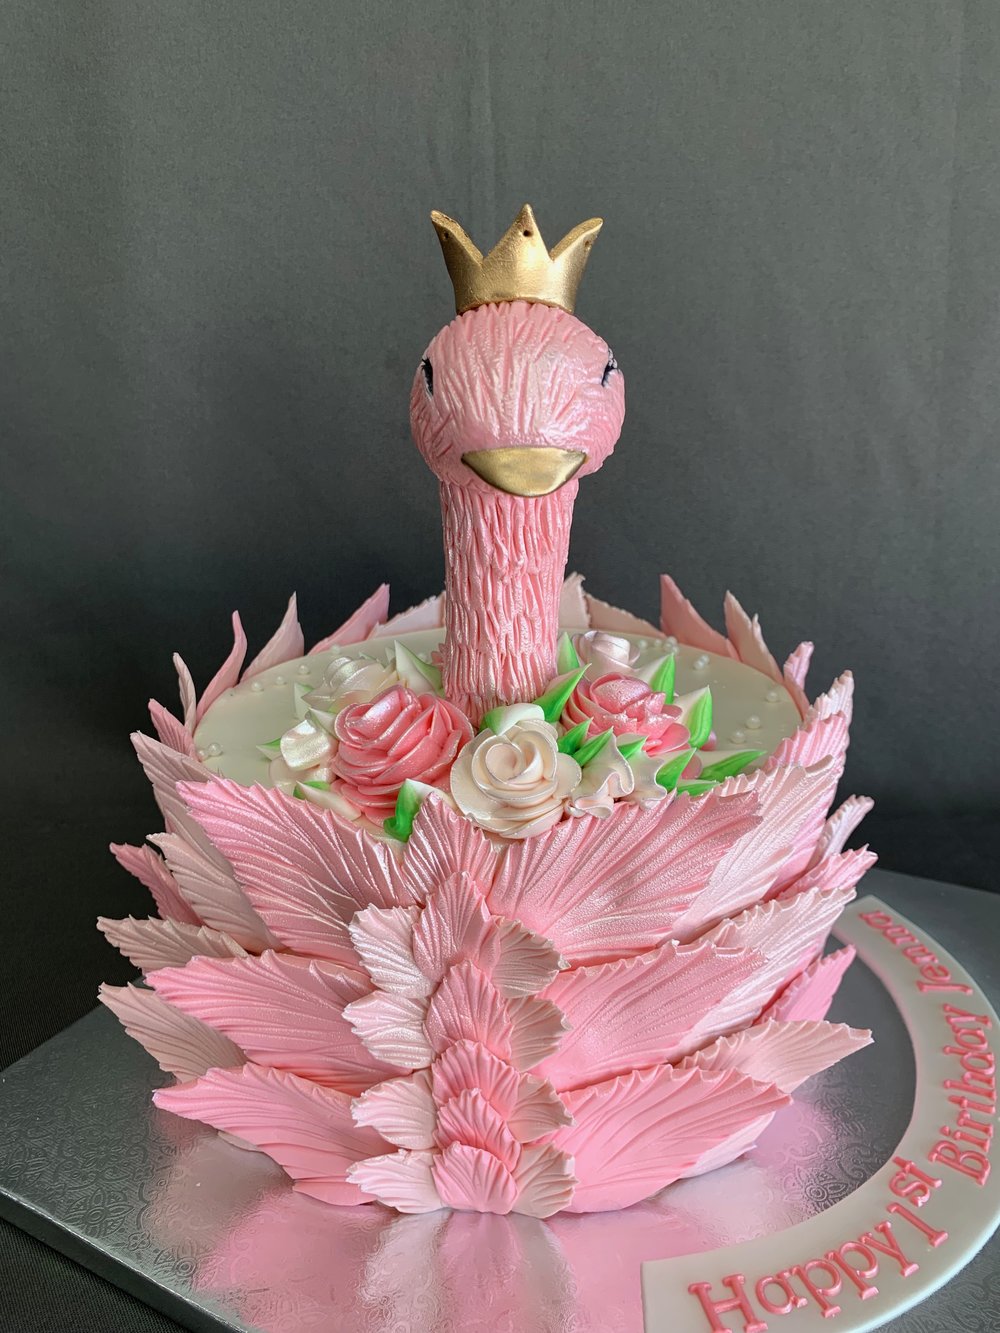 Swan Cake - Elegant and Whimsical Dessert for Special Occasions